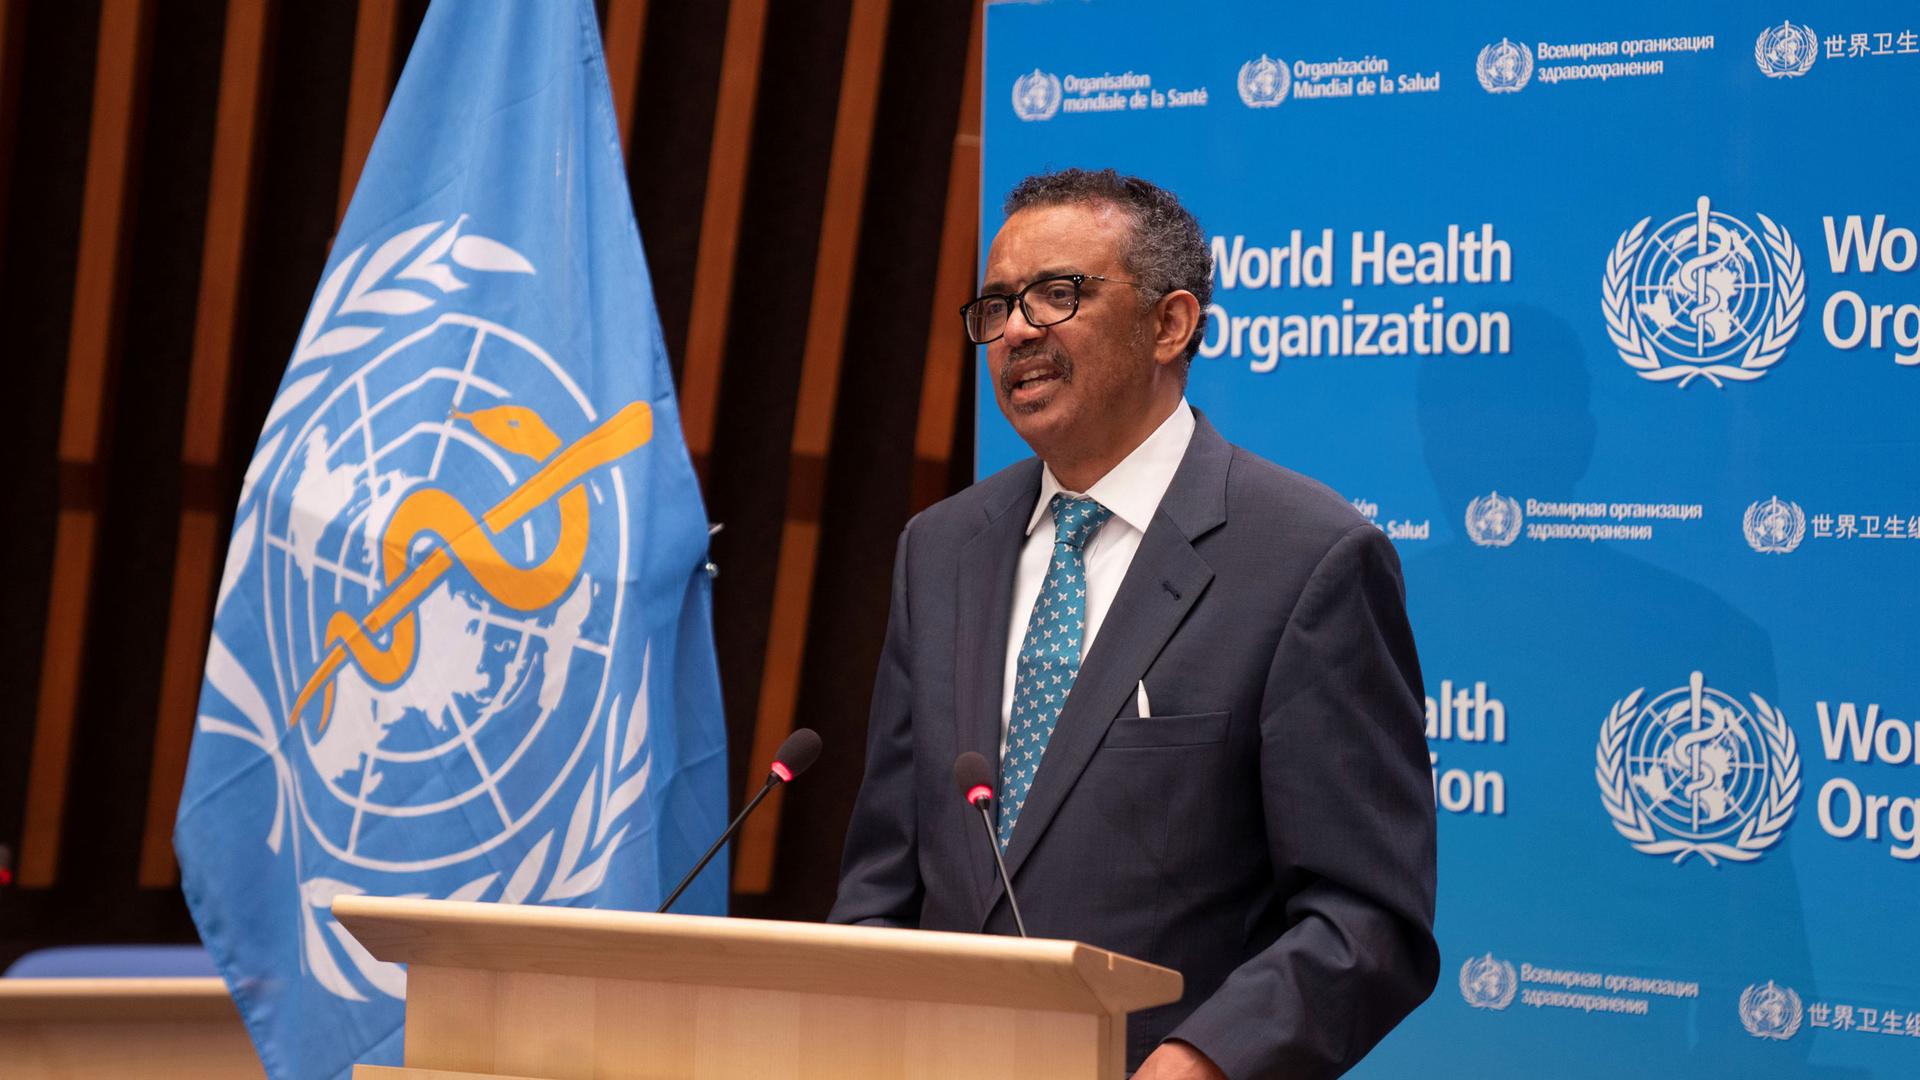 Tedros Adhanom Ghebreyesus is shown standing at a wooden podium with the blue WHO flag next to him.